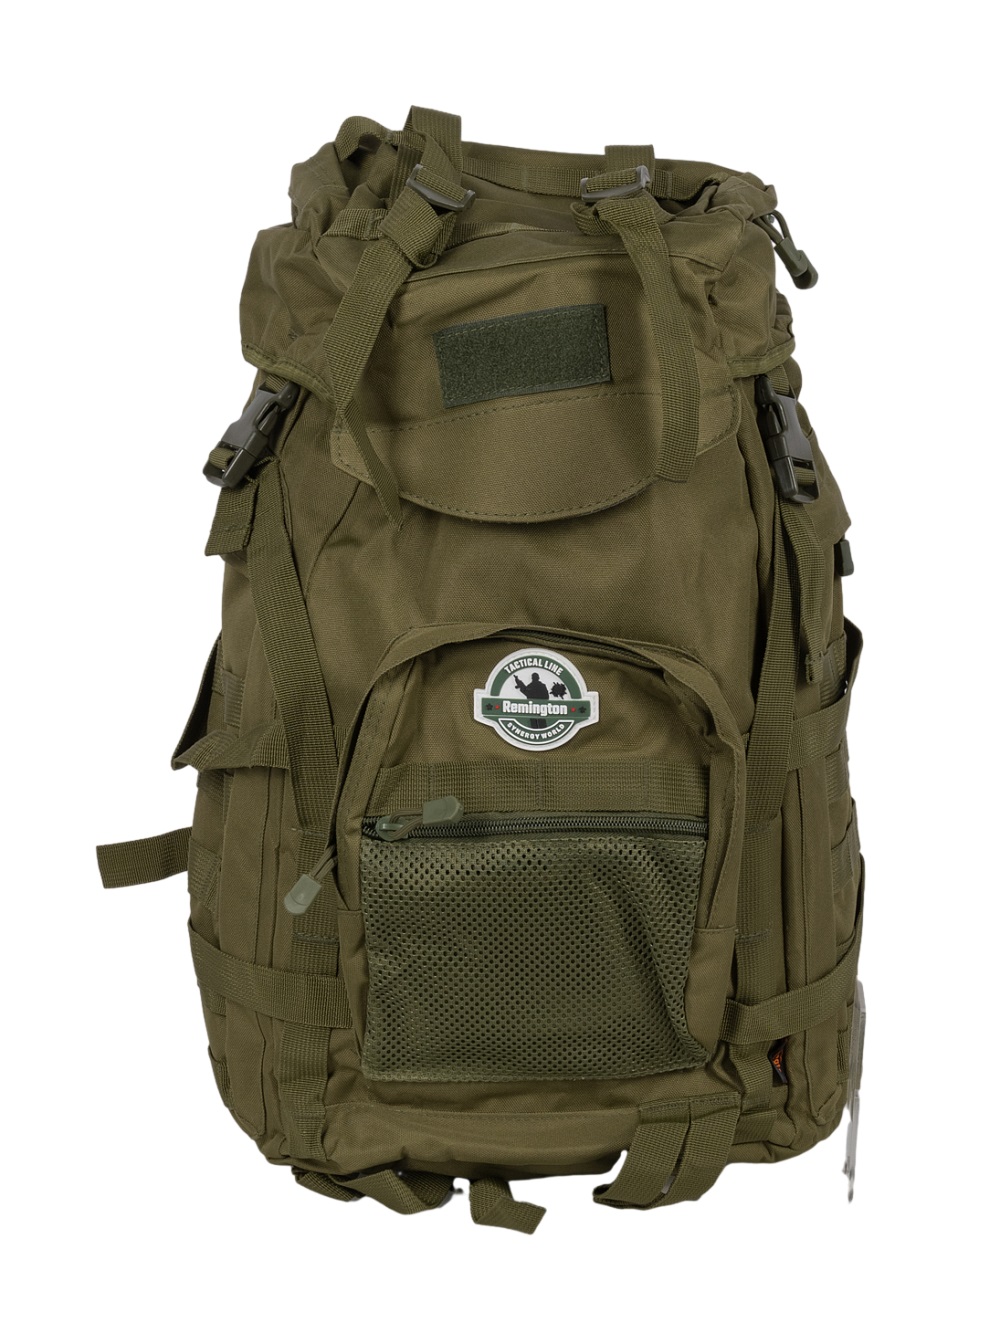 Рюкзак Remington Large Tactical Backpack Army Green RK6605-306